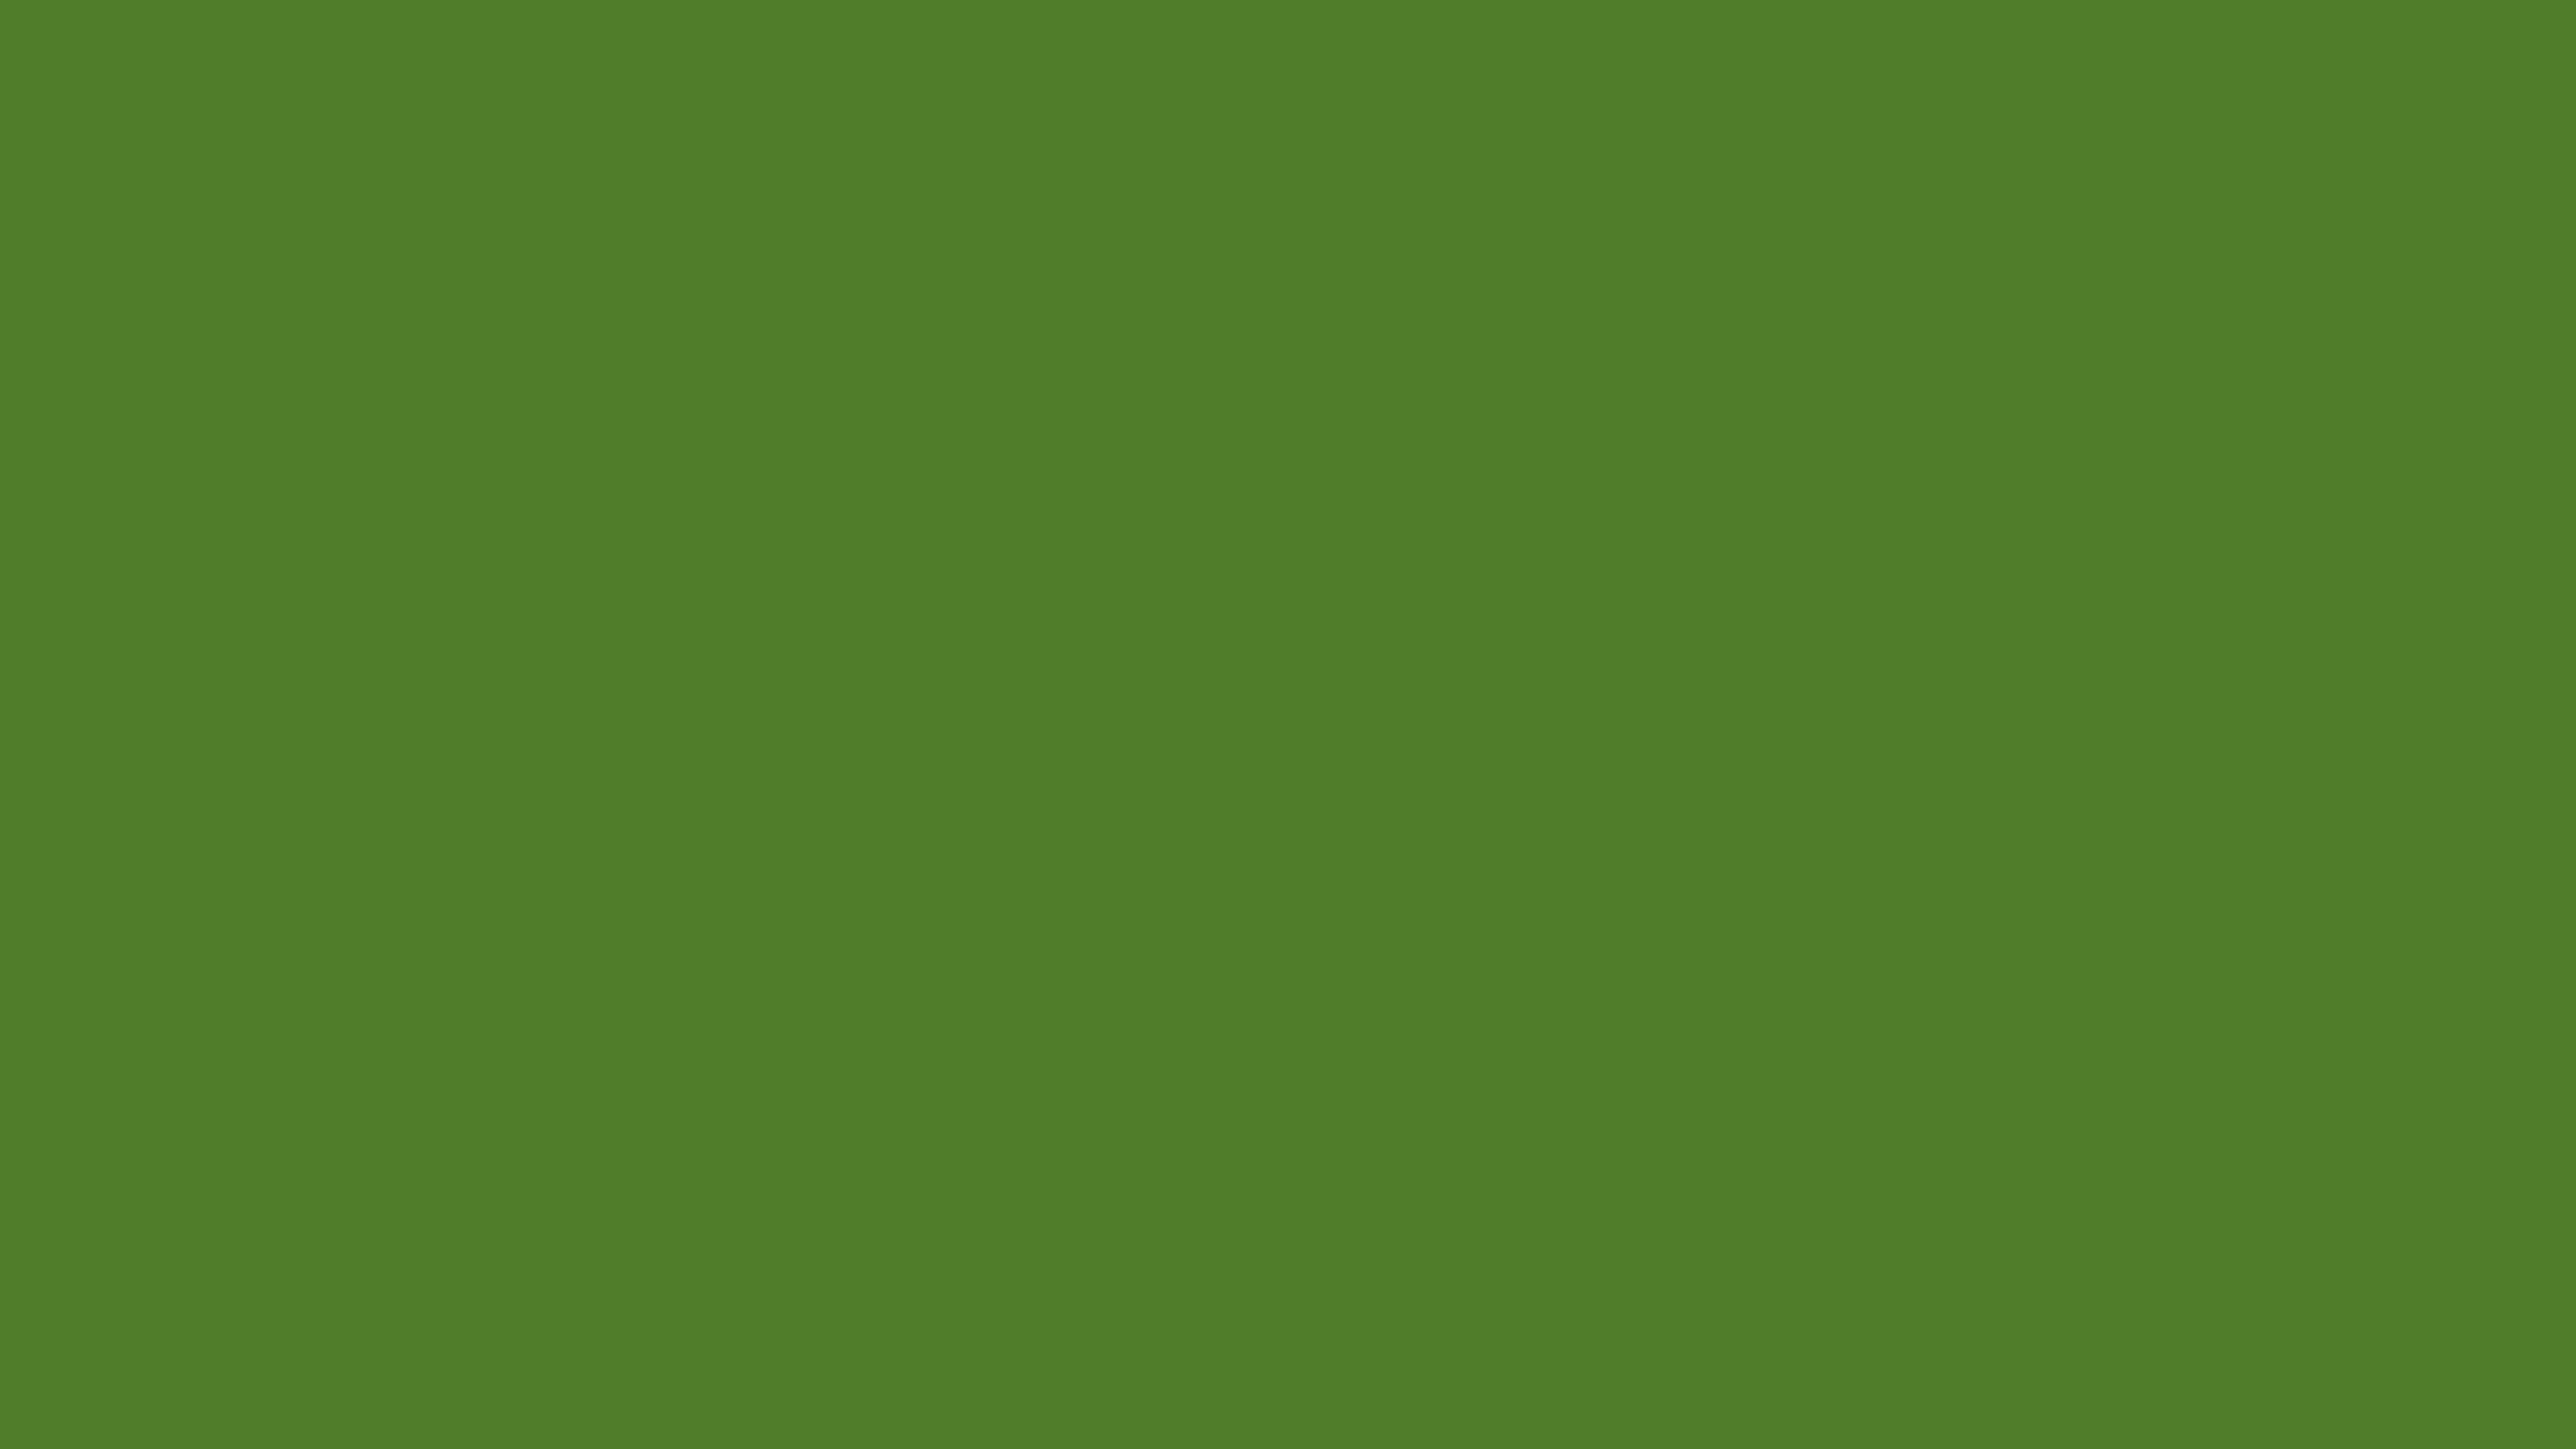 4096x2304 Sap Green Solid Color Background